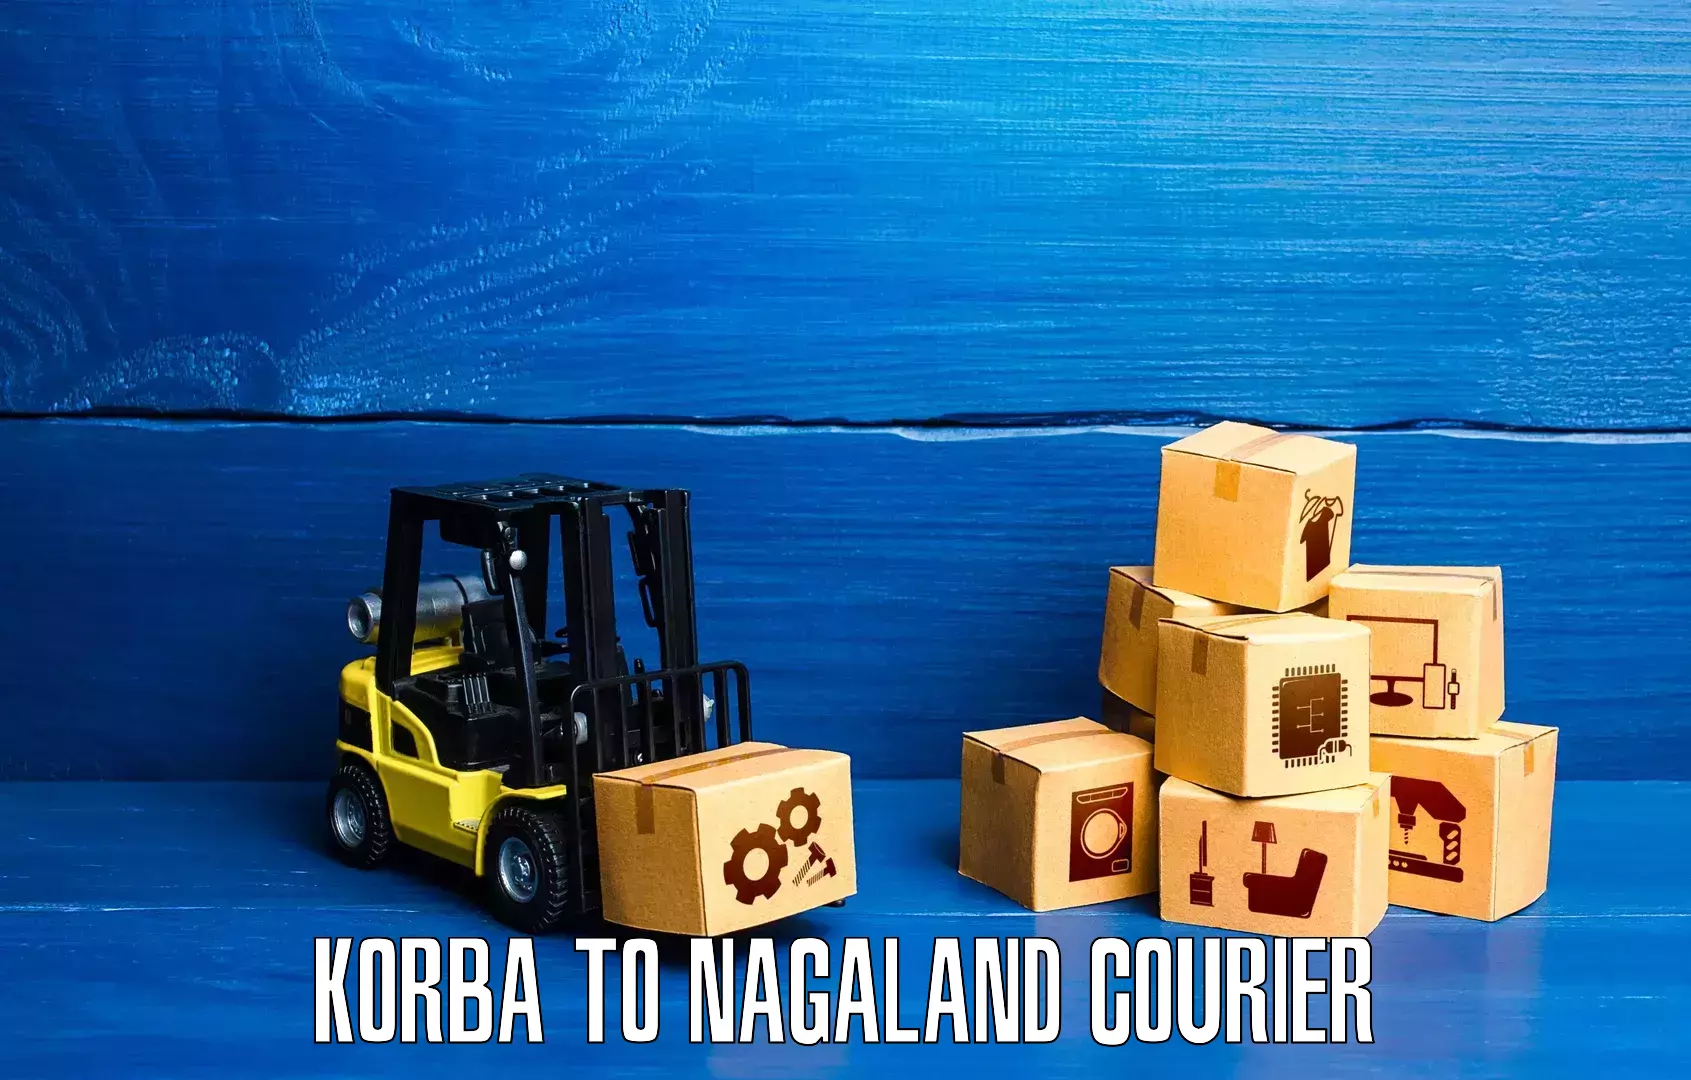 Courier service booking Korba to Nagaland